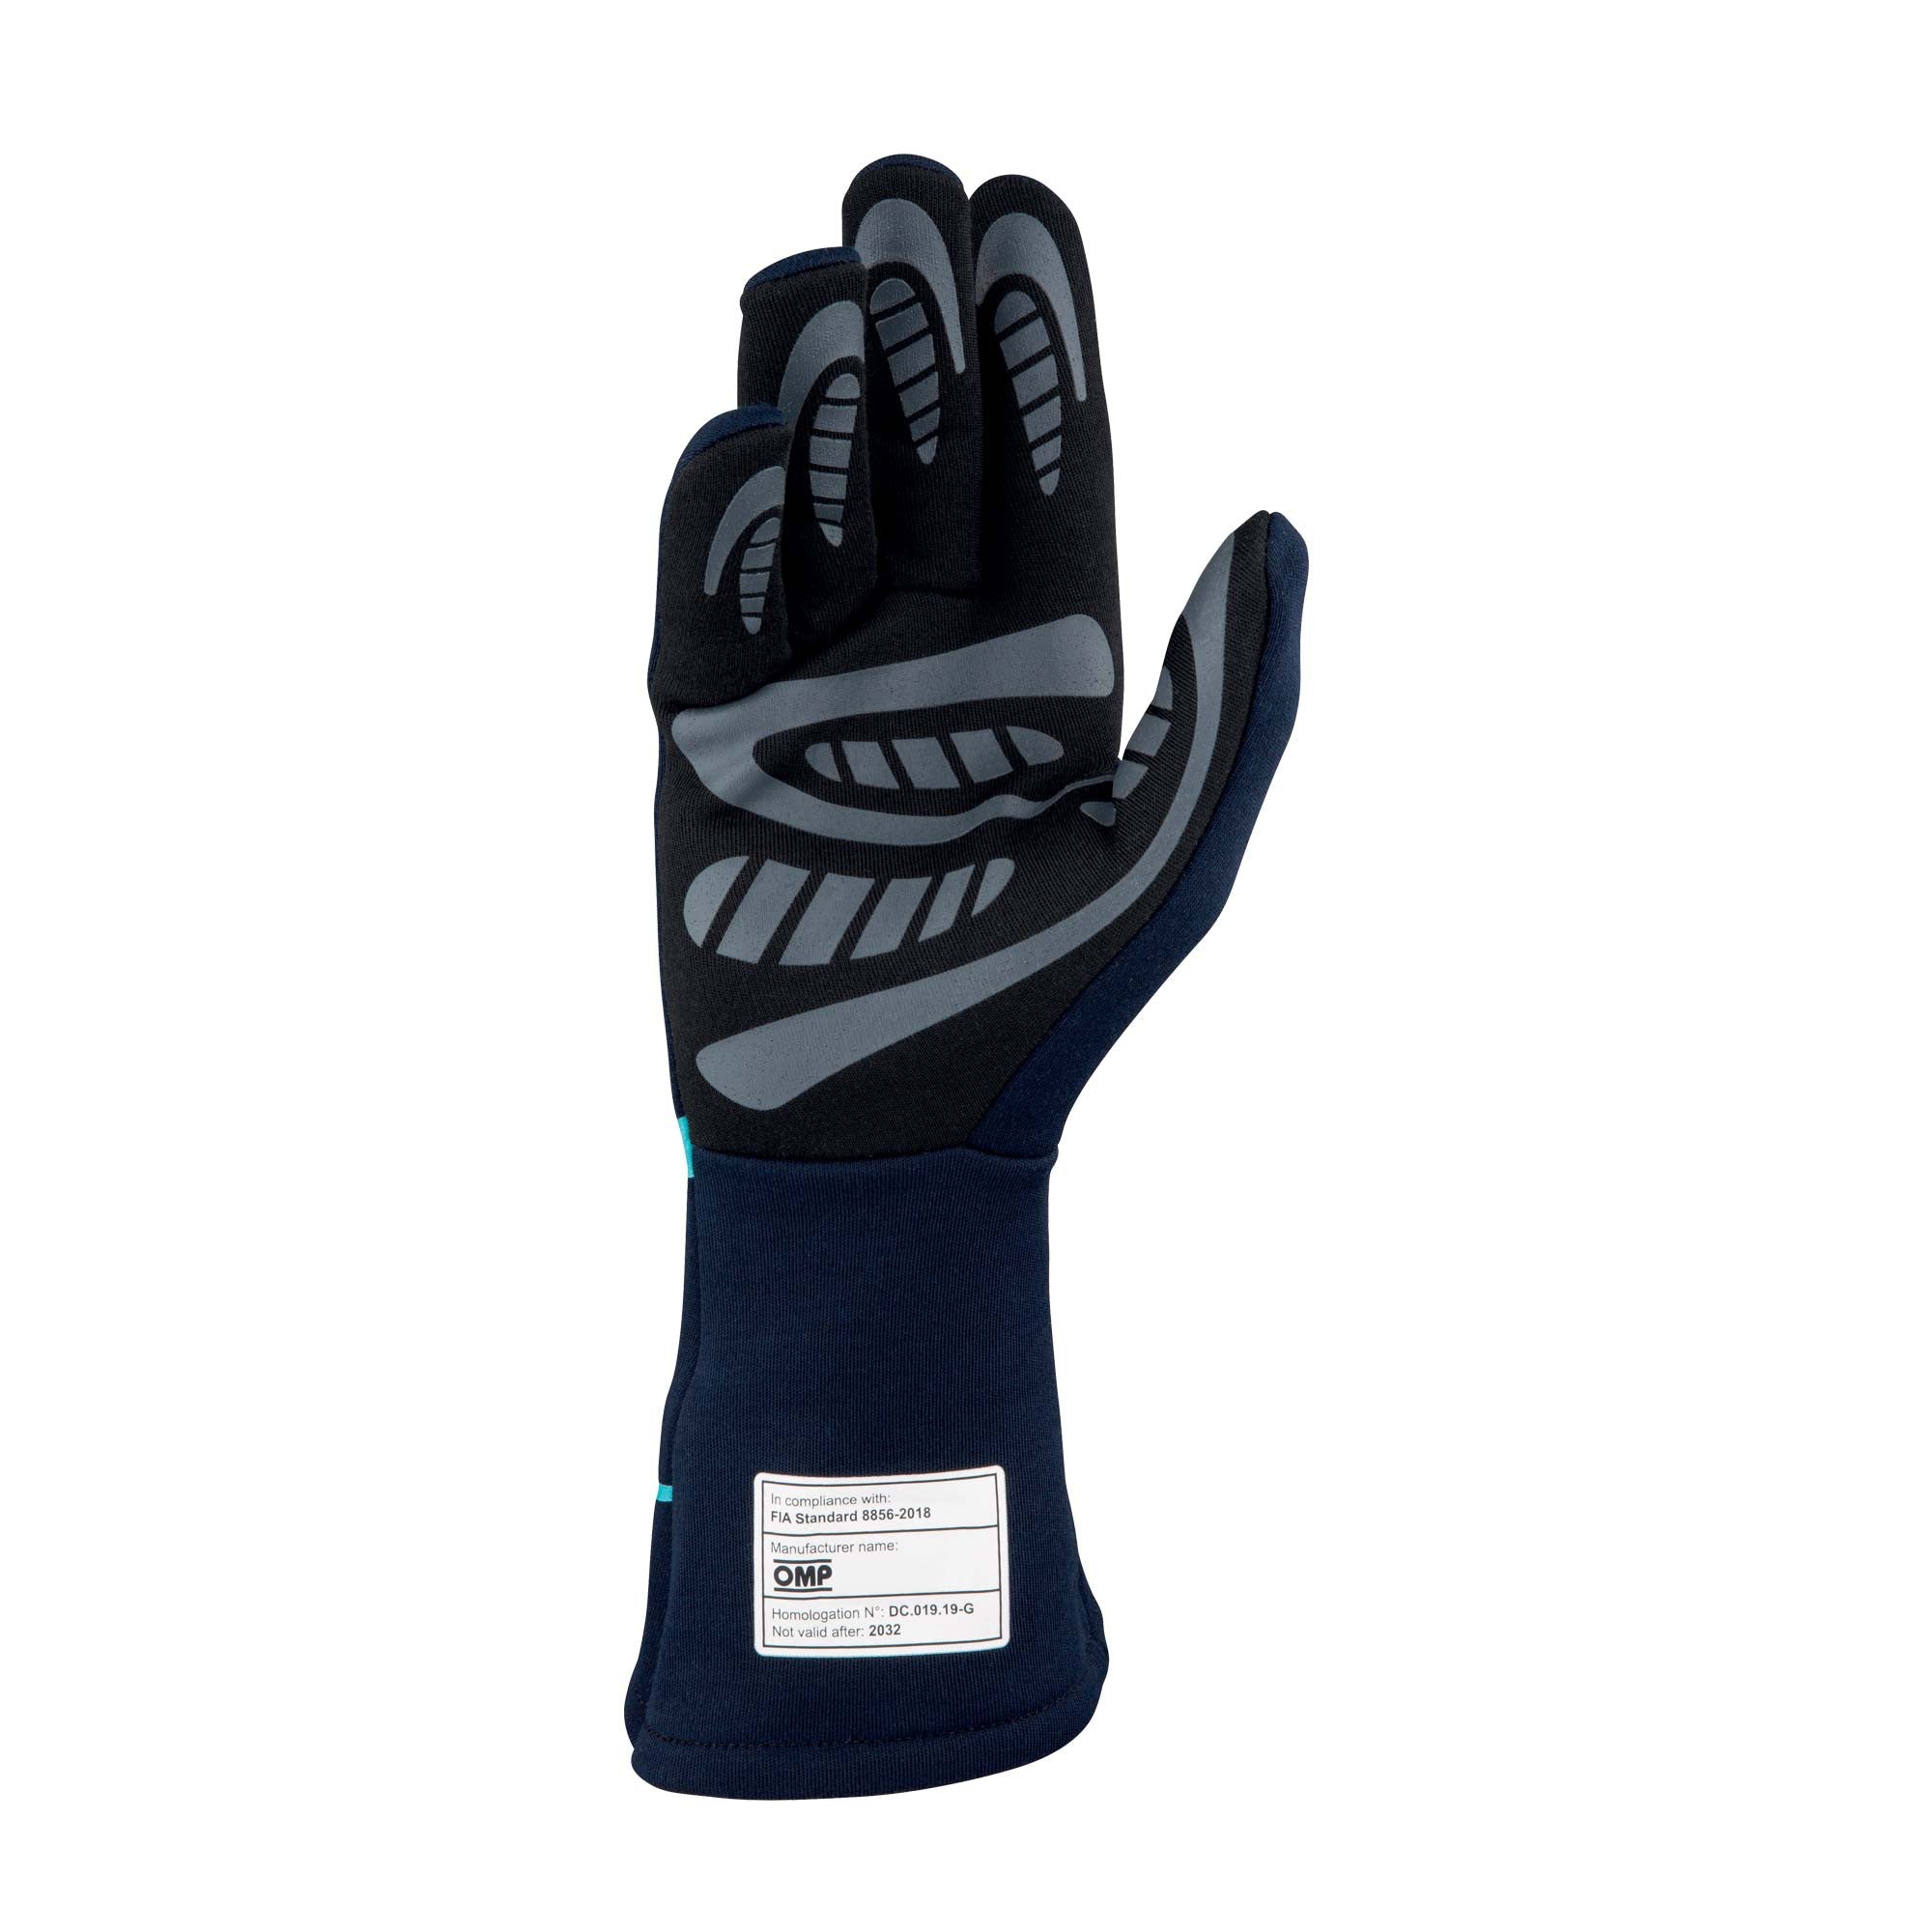 OMP IB0-0761-C01-248-S FIRST-S my2020 Racing gloves, FIA 8856-2018, navy blue/tiffany, size S Photo-1 